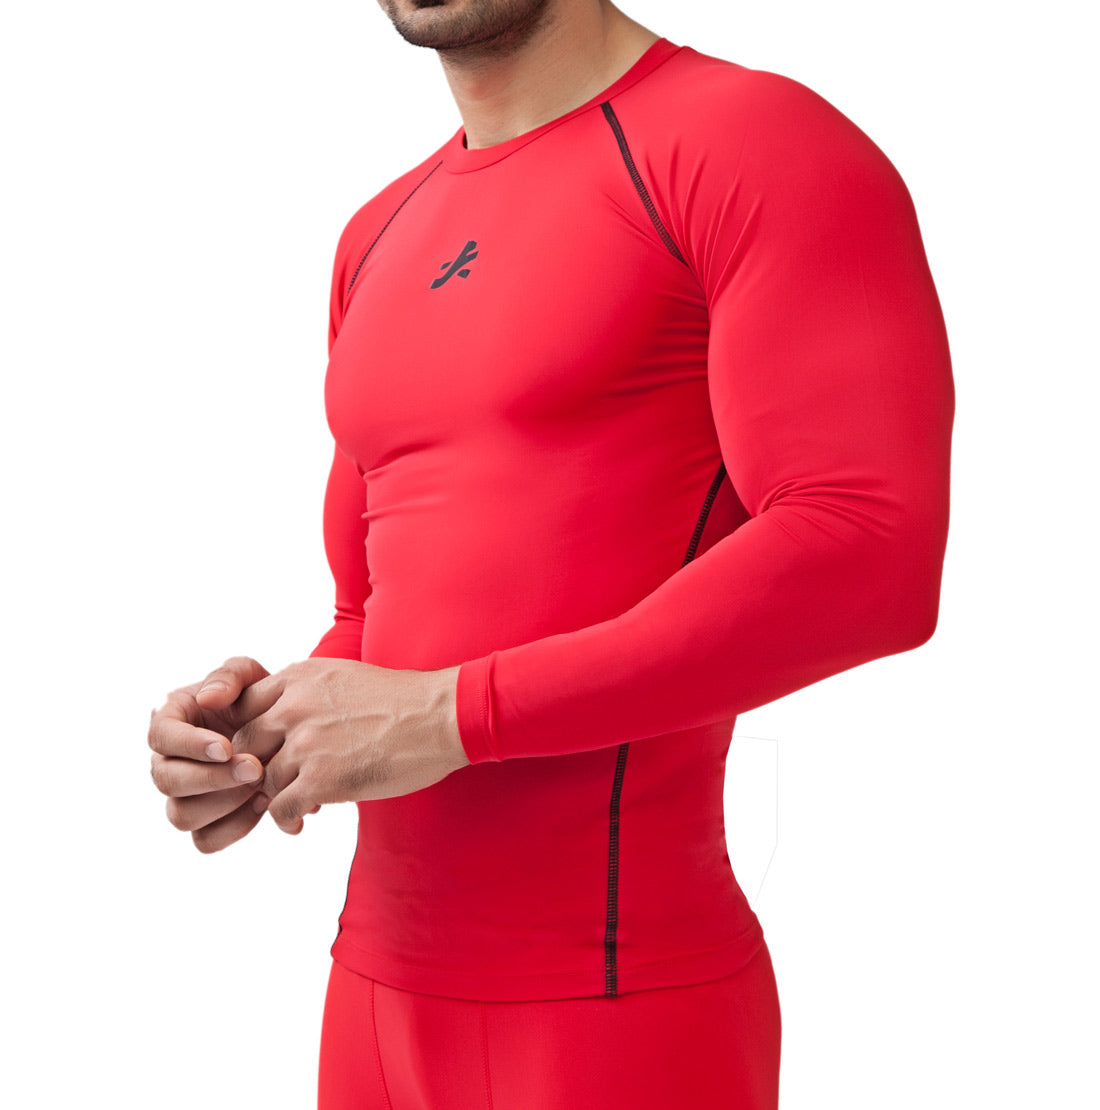 Nylon Compression Tshirt Full Sleeve Tights For Men (Red)